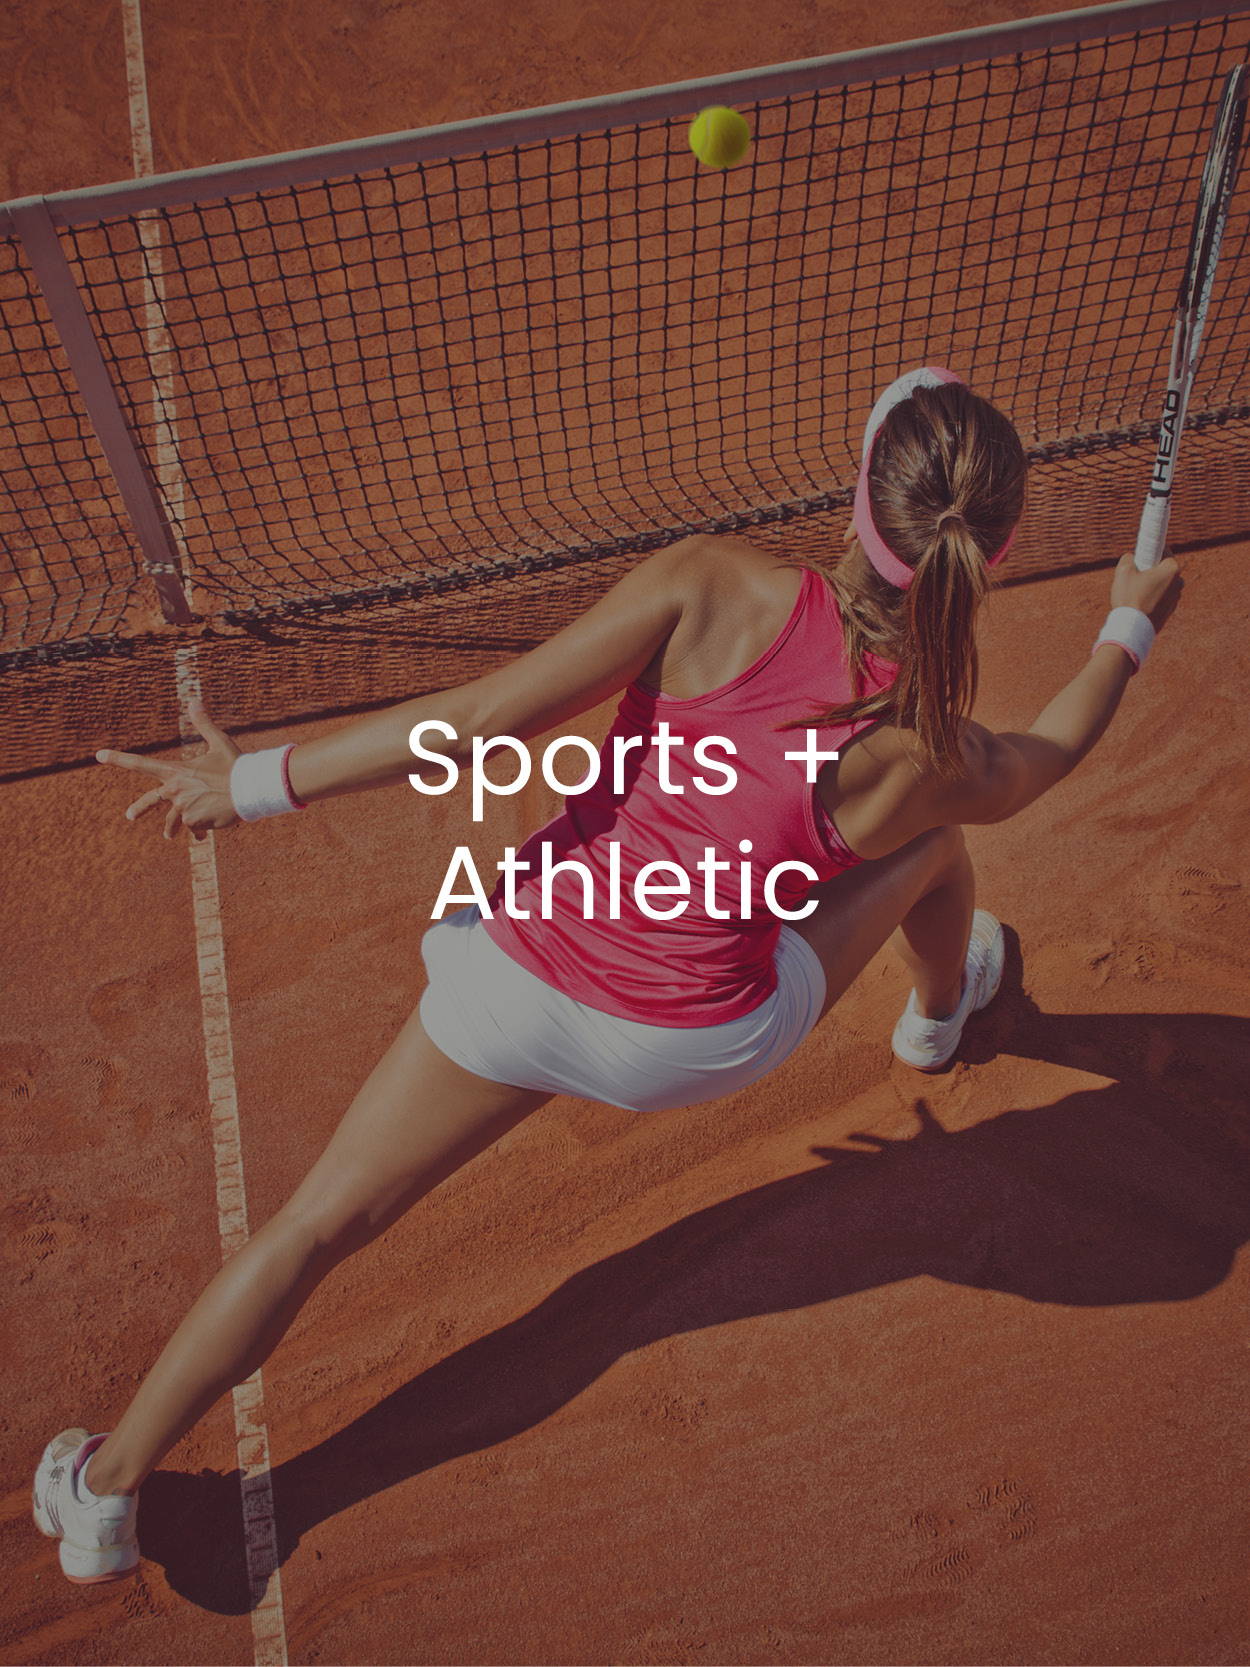 Sports + Athletic